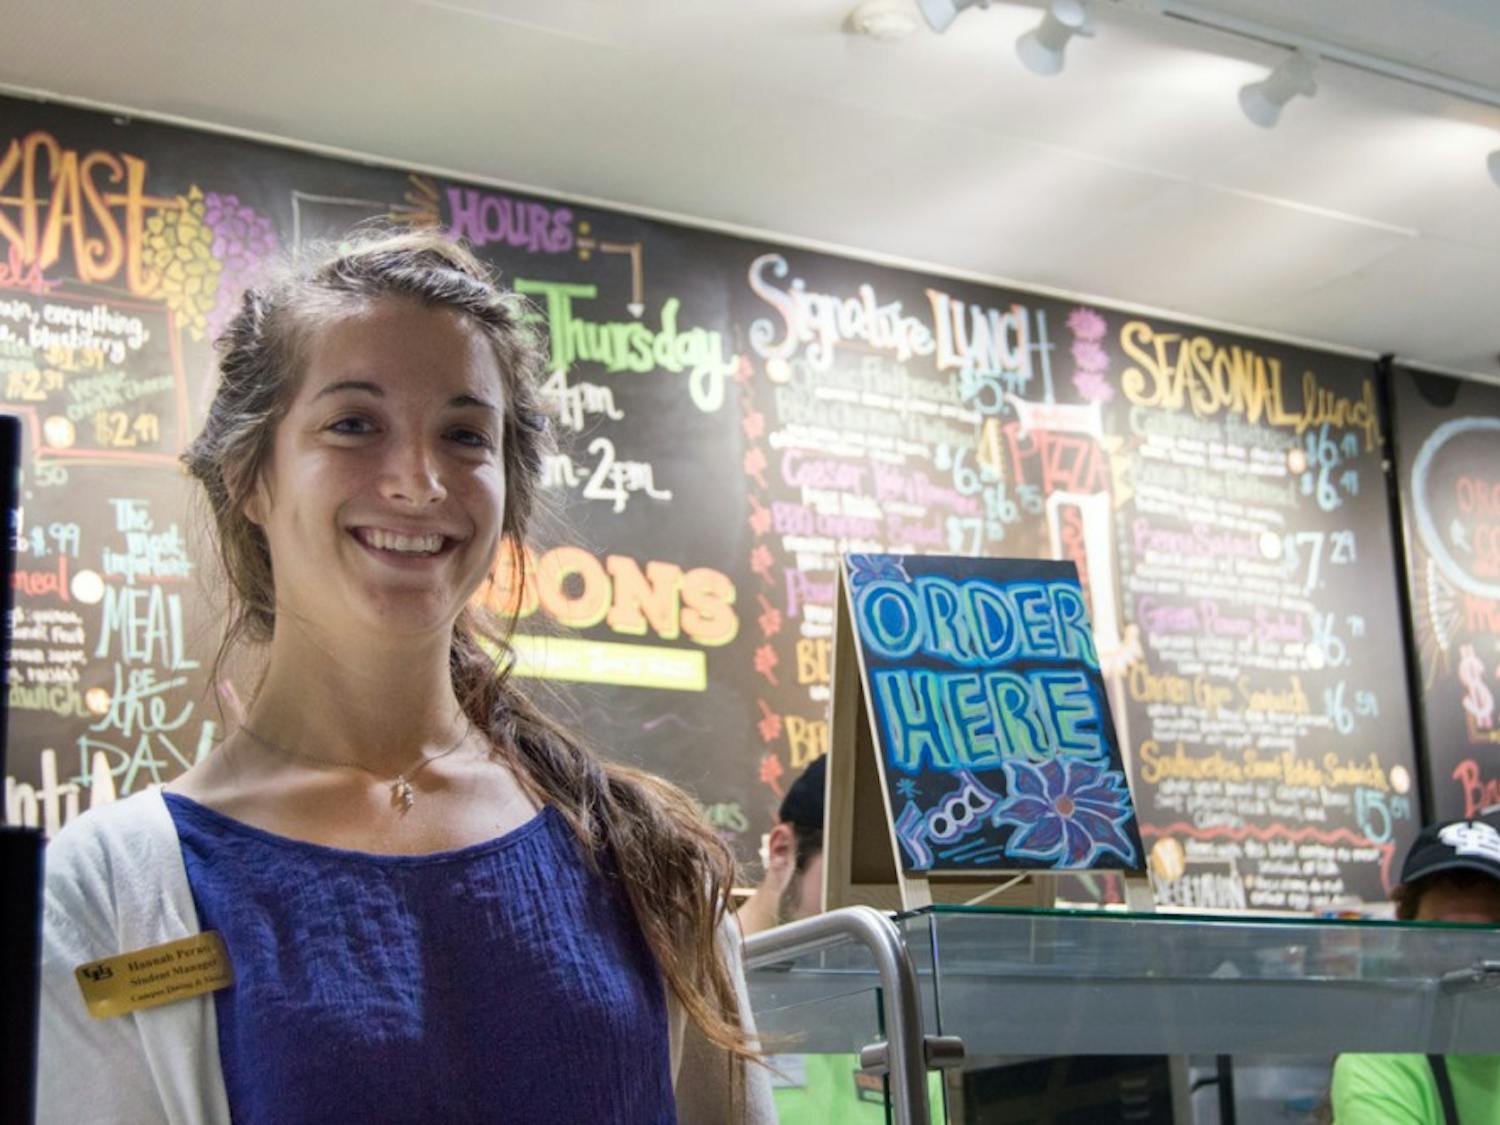 Hannah Perno, a senior environmental science major, was commissioned to create the vibrant blackboard menu in the new Center for the Arts café, Seasons. The organic café and juice bar is part of UB Campus Dining and Shops and UB Sustainability’s initial plan for a greener campus.